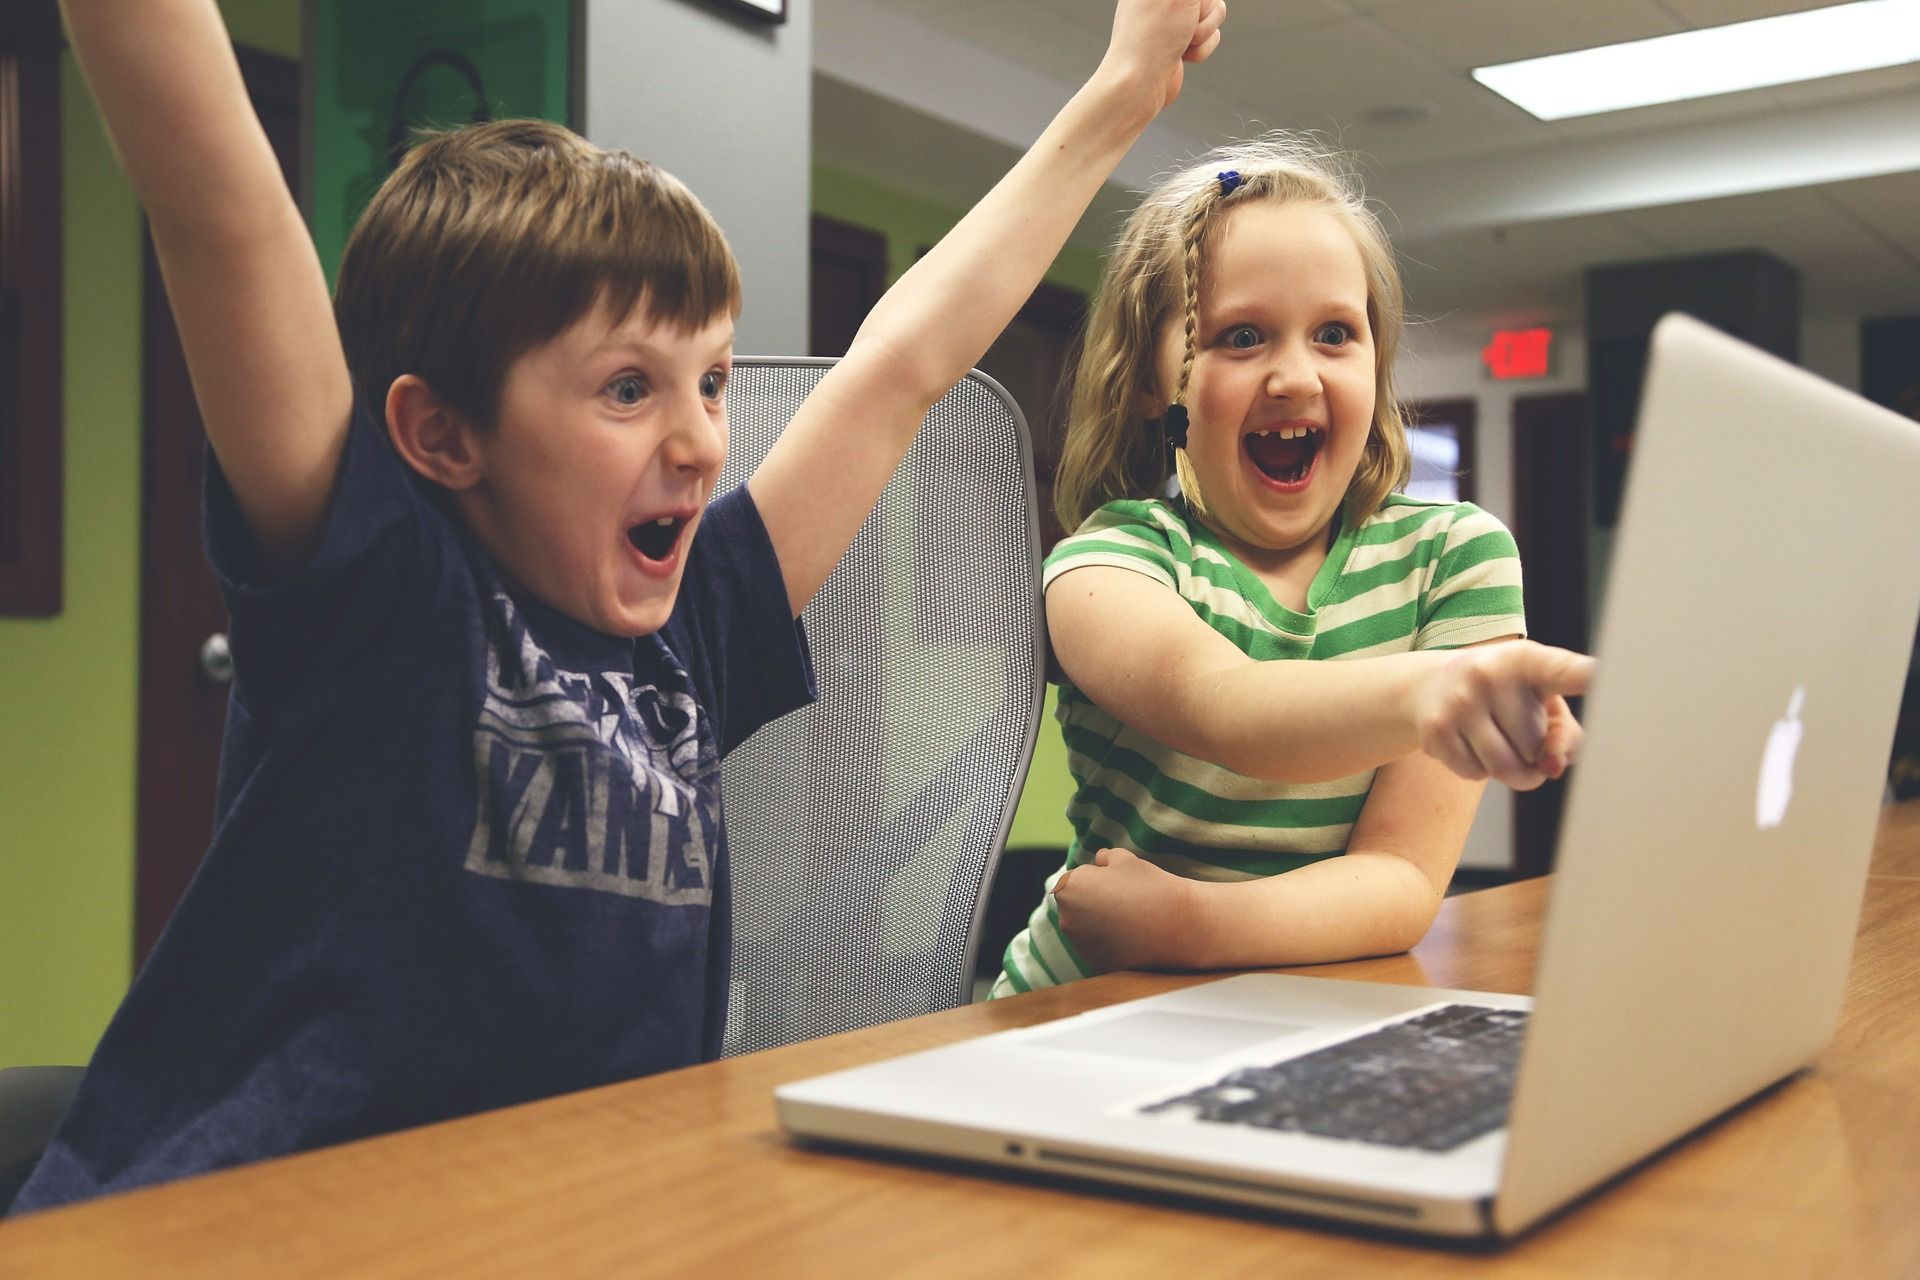 Here is an image of two kids watching a TV show on their Computer. 
Photo credits by Pixabay the link of the photo is bleow. 
https://pixabay.com/en/children-win-success-video-game-593313/